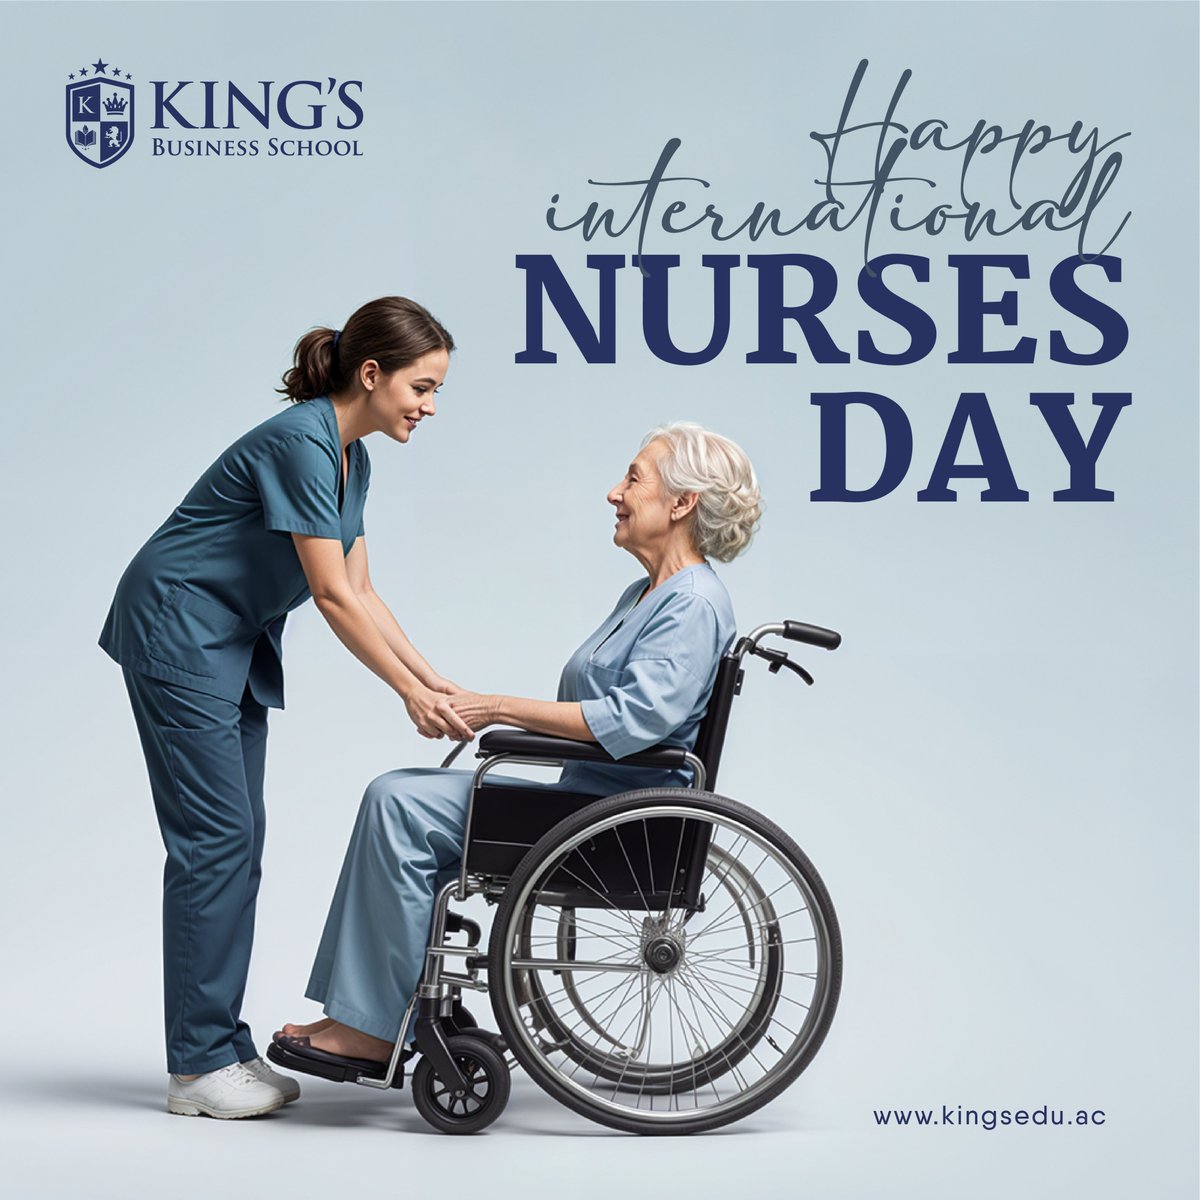 Today, we celebrate the invaluable contributions of nurses worldwide. Thank you for your dedication, compassion, and tireless efforts in providing exceptional care to patients every day. You are the heart of healthcare. 🩺💙
.
.

#NursesDay #HealthcareHeroes #kingsbusinessschool